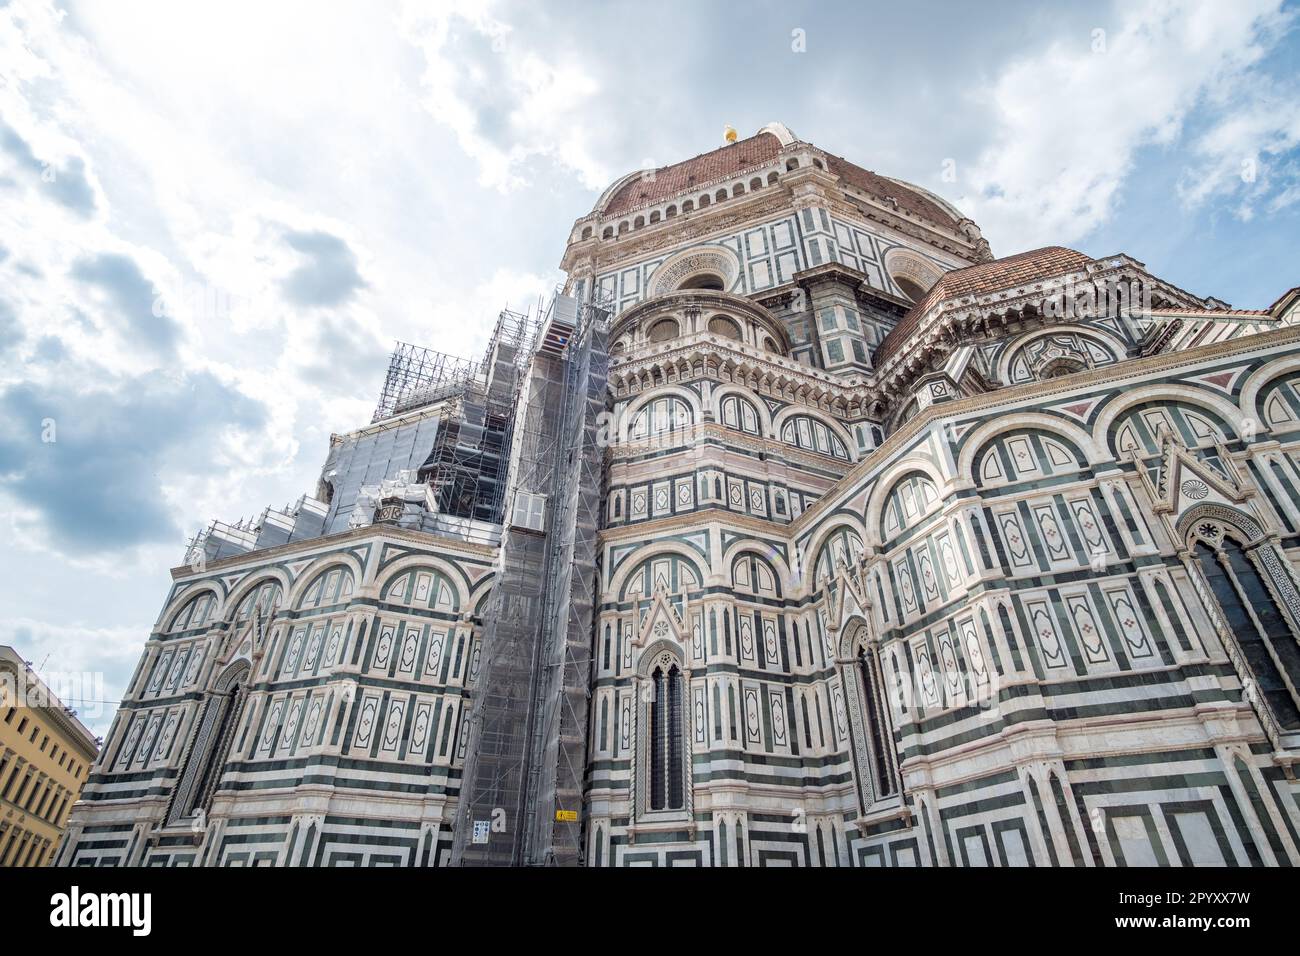 Detail of Florence Duomo Cathedral. Basilica di Santa Maria del Fiore or Basilica of Saint Mary of the Flower in Florence, Italy Stock Photo